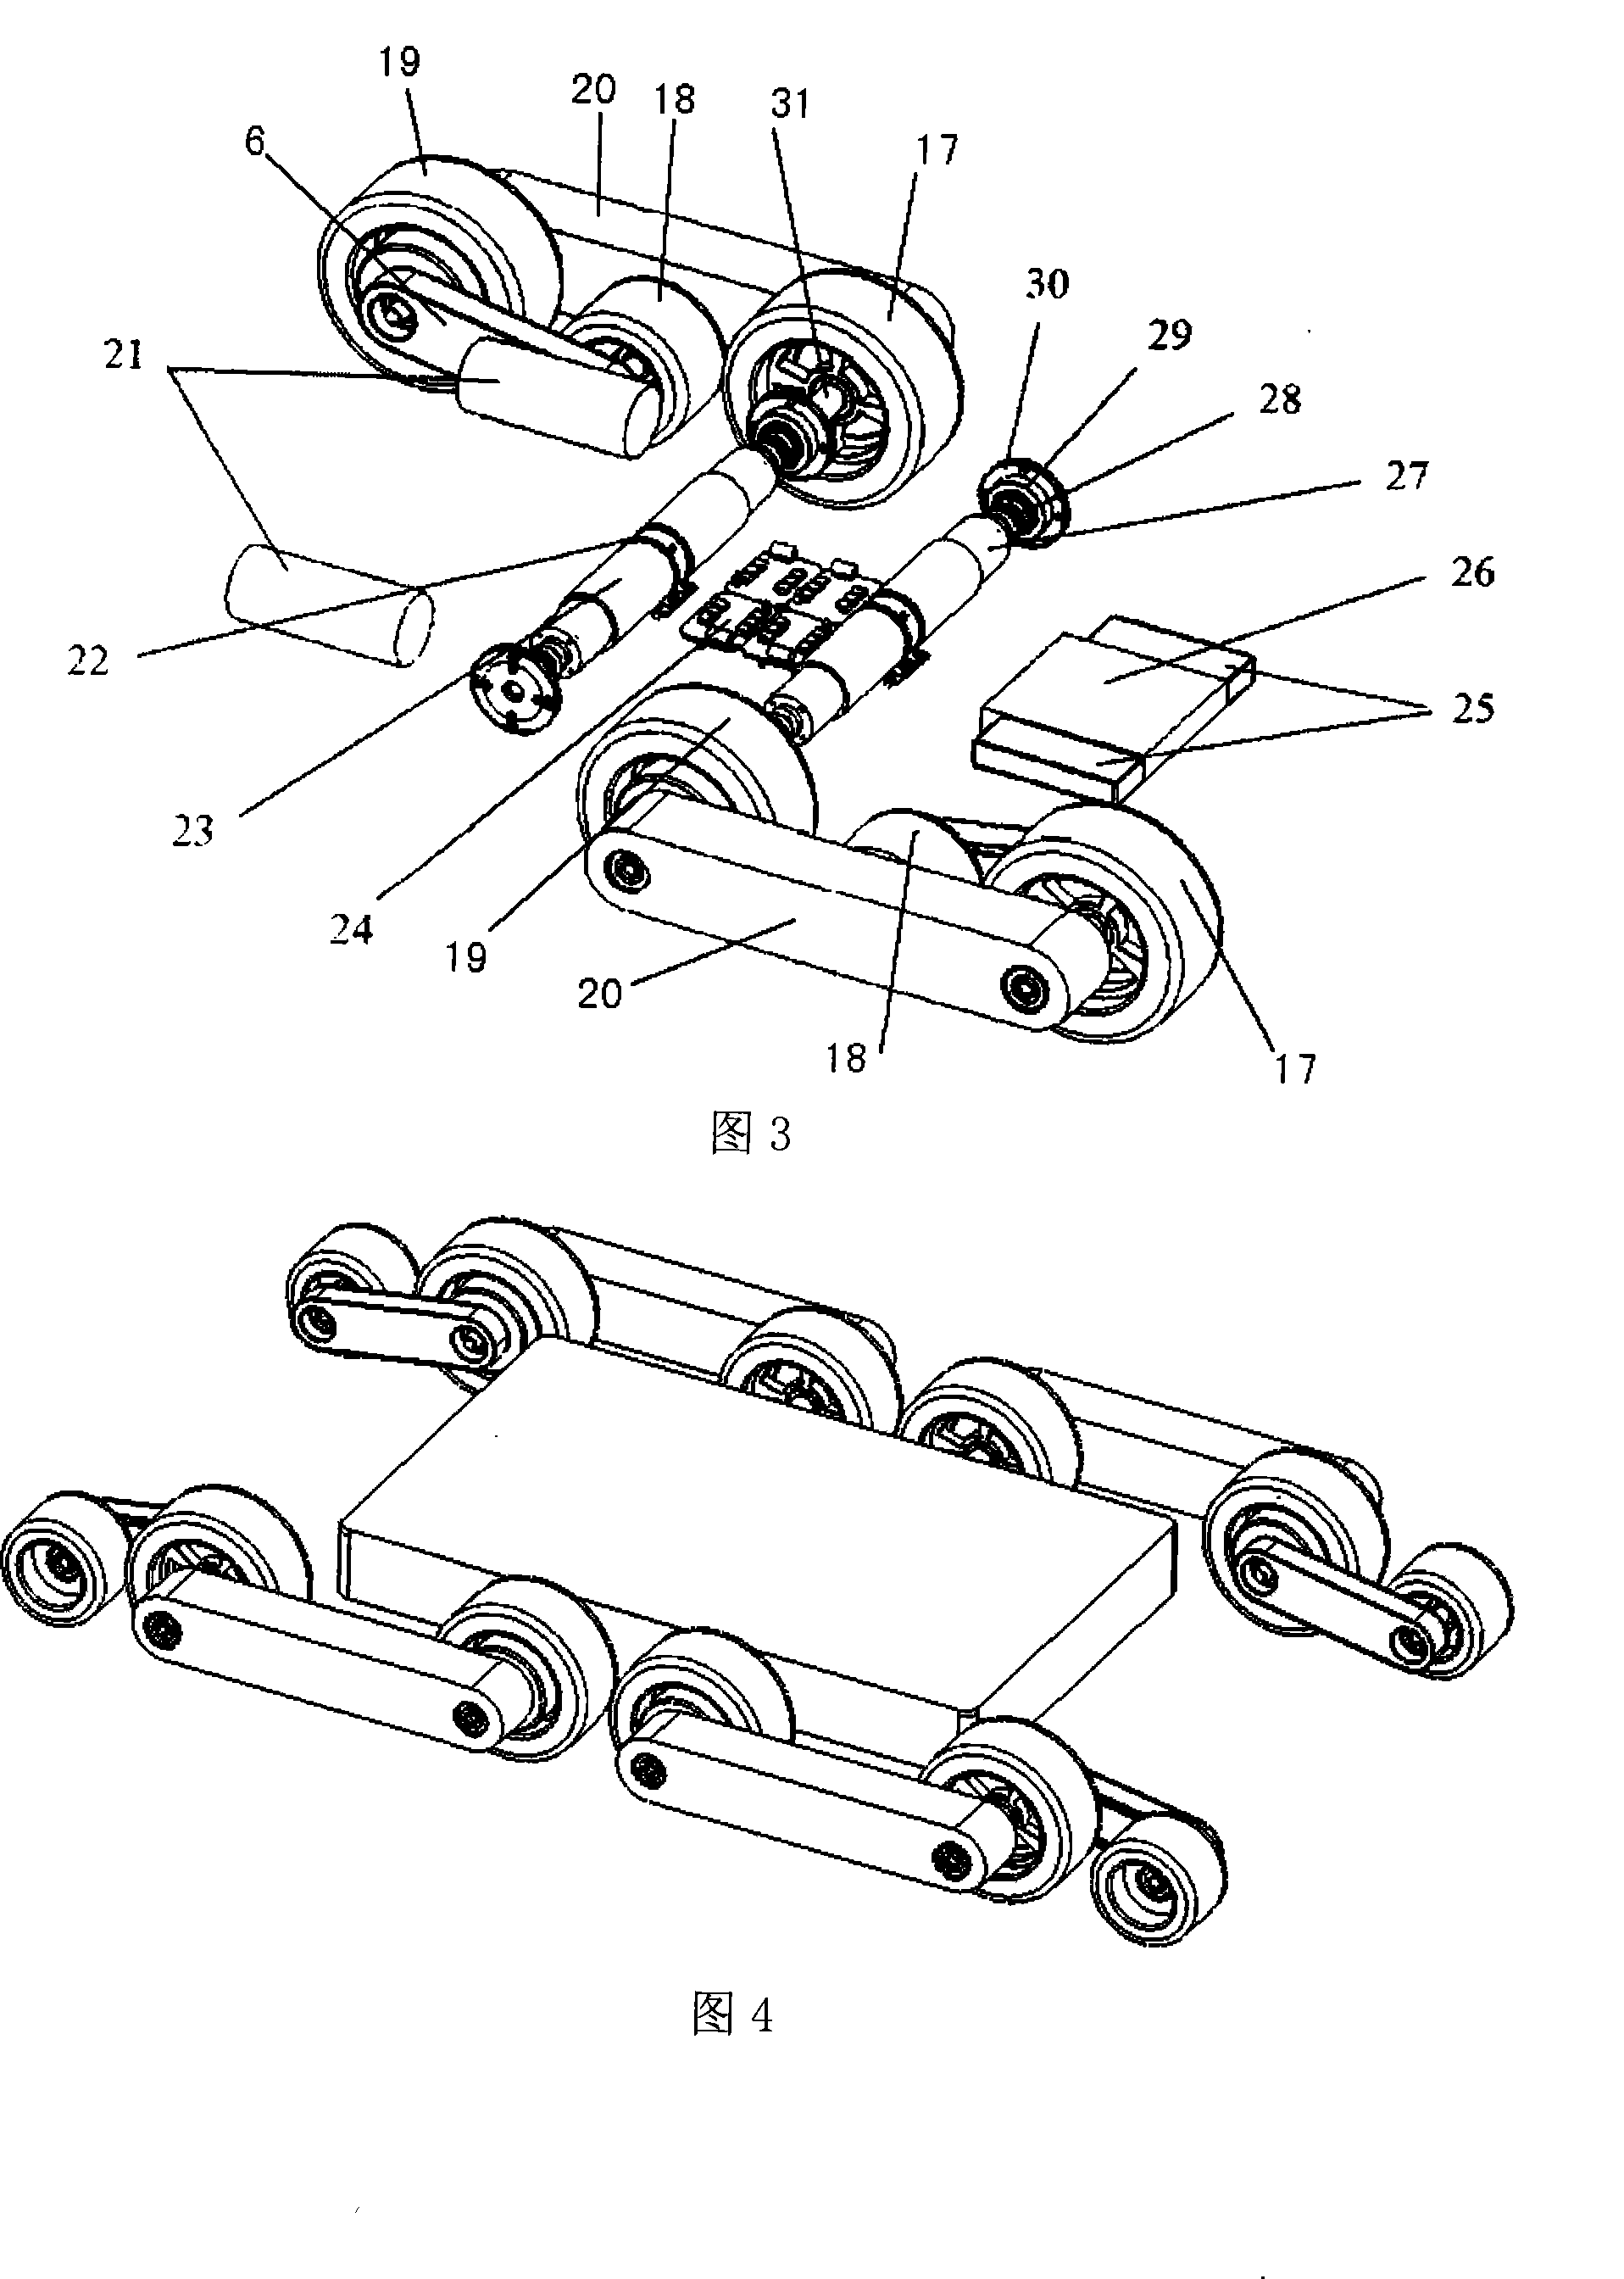 Dual-purpose mobile robot of wheel and foot